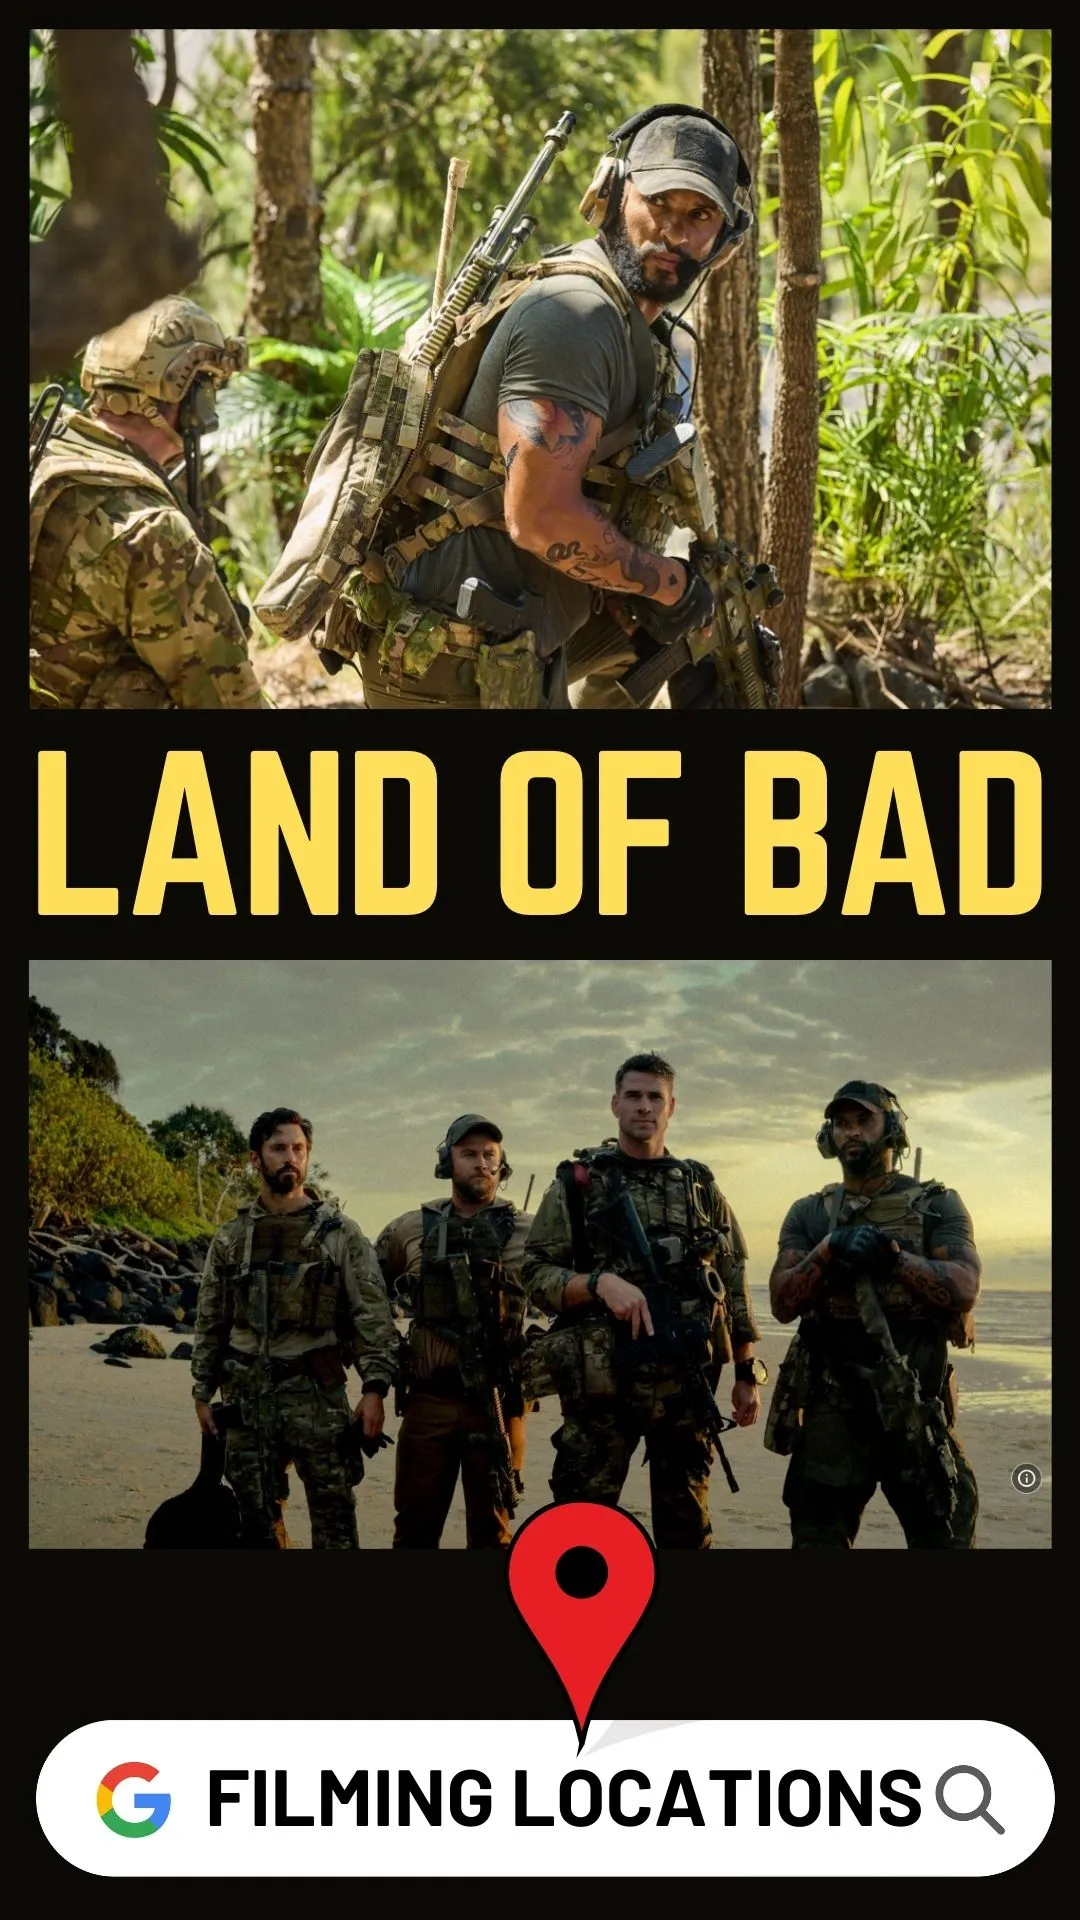 Land of Bad Filming Locations